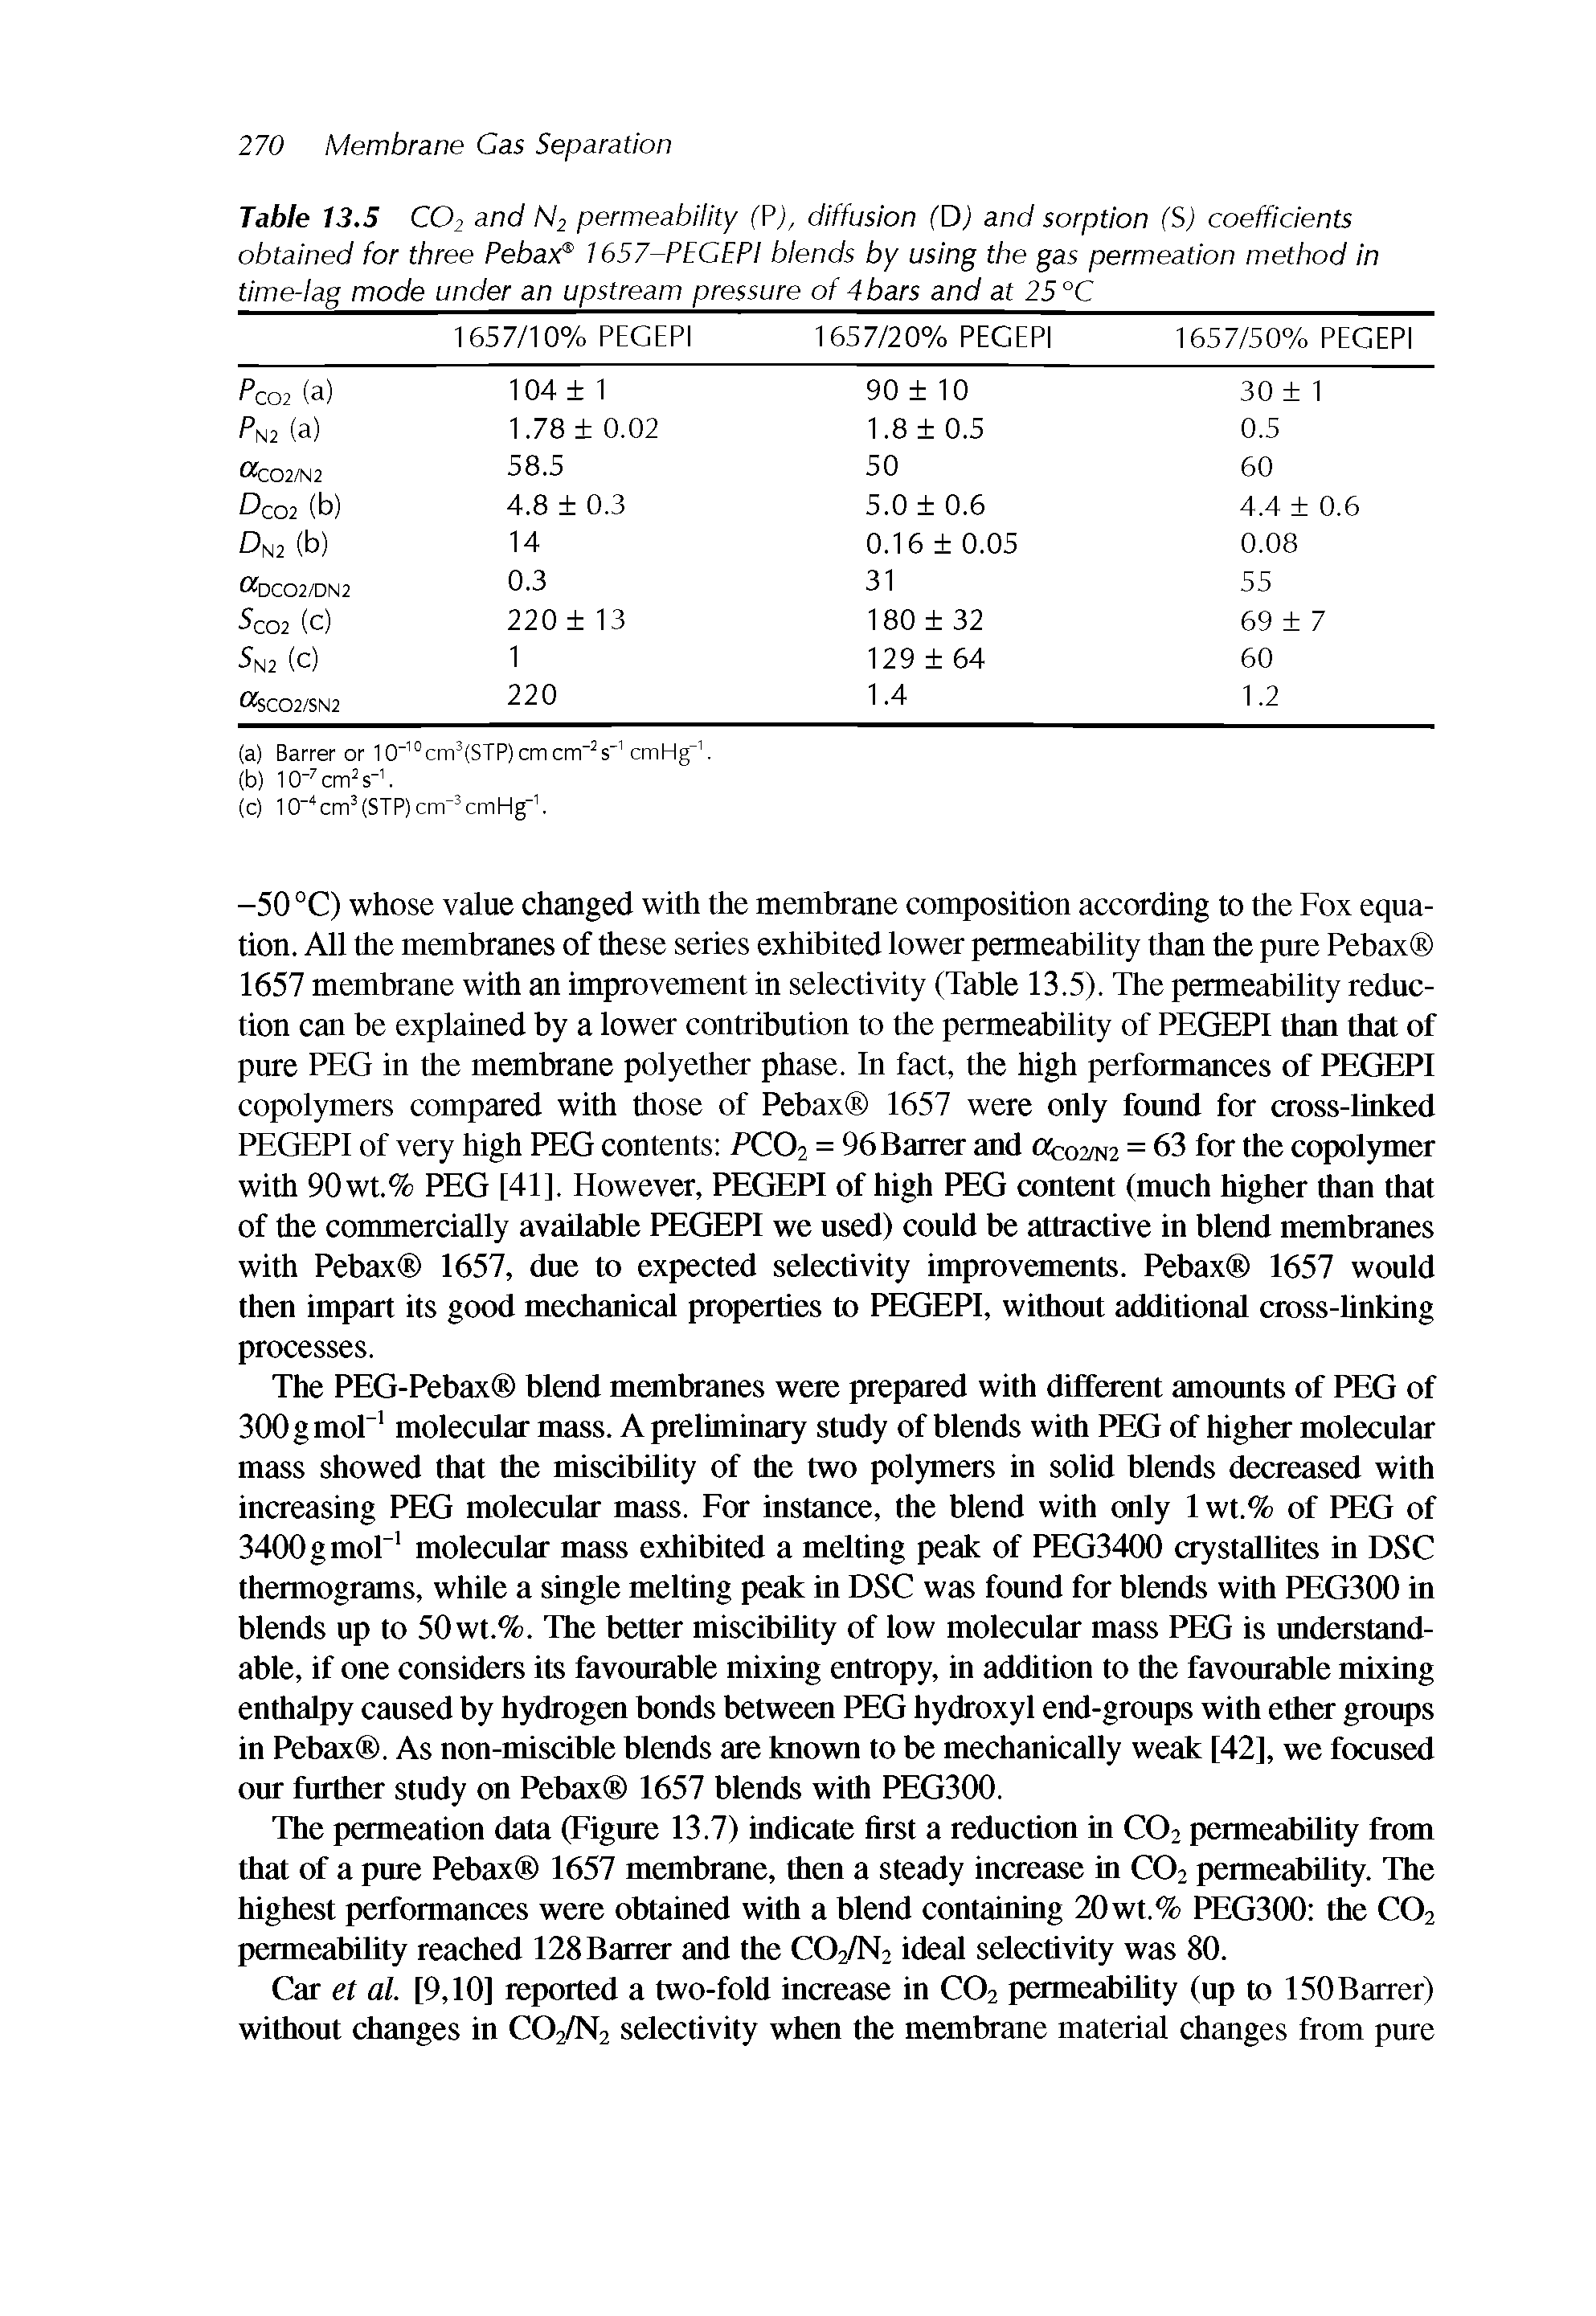 Table 13.5 CO2 and N2 permeability (P), diffusion (D) and sorption (S) coefficients obtained for three Pebax 1657-PECEPi blends by using the gas permeation method in...